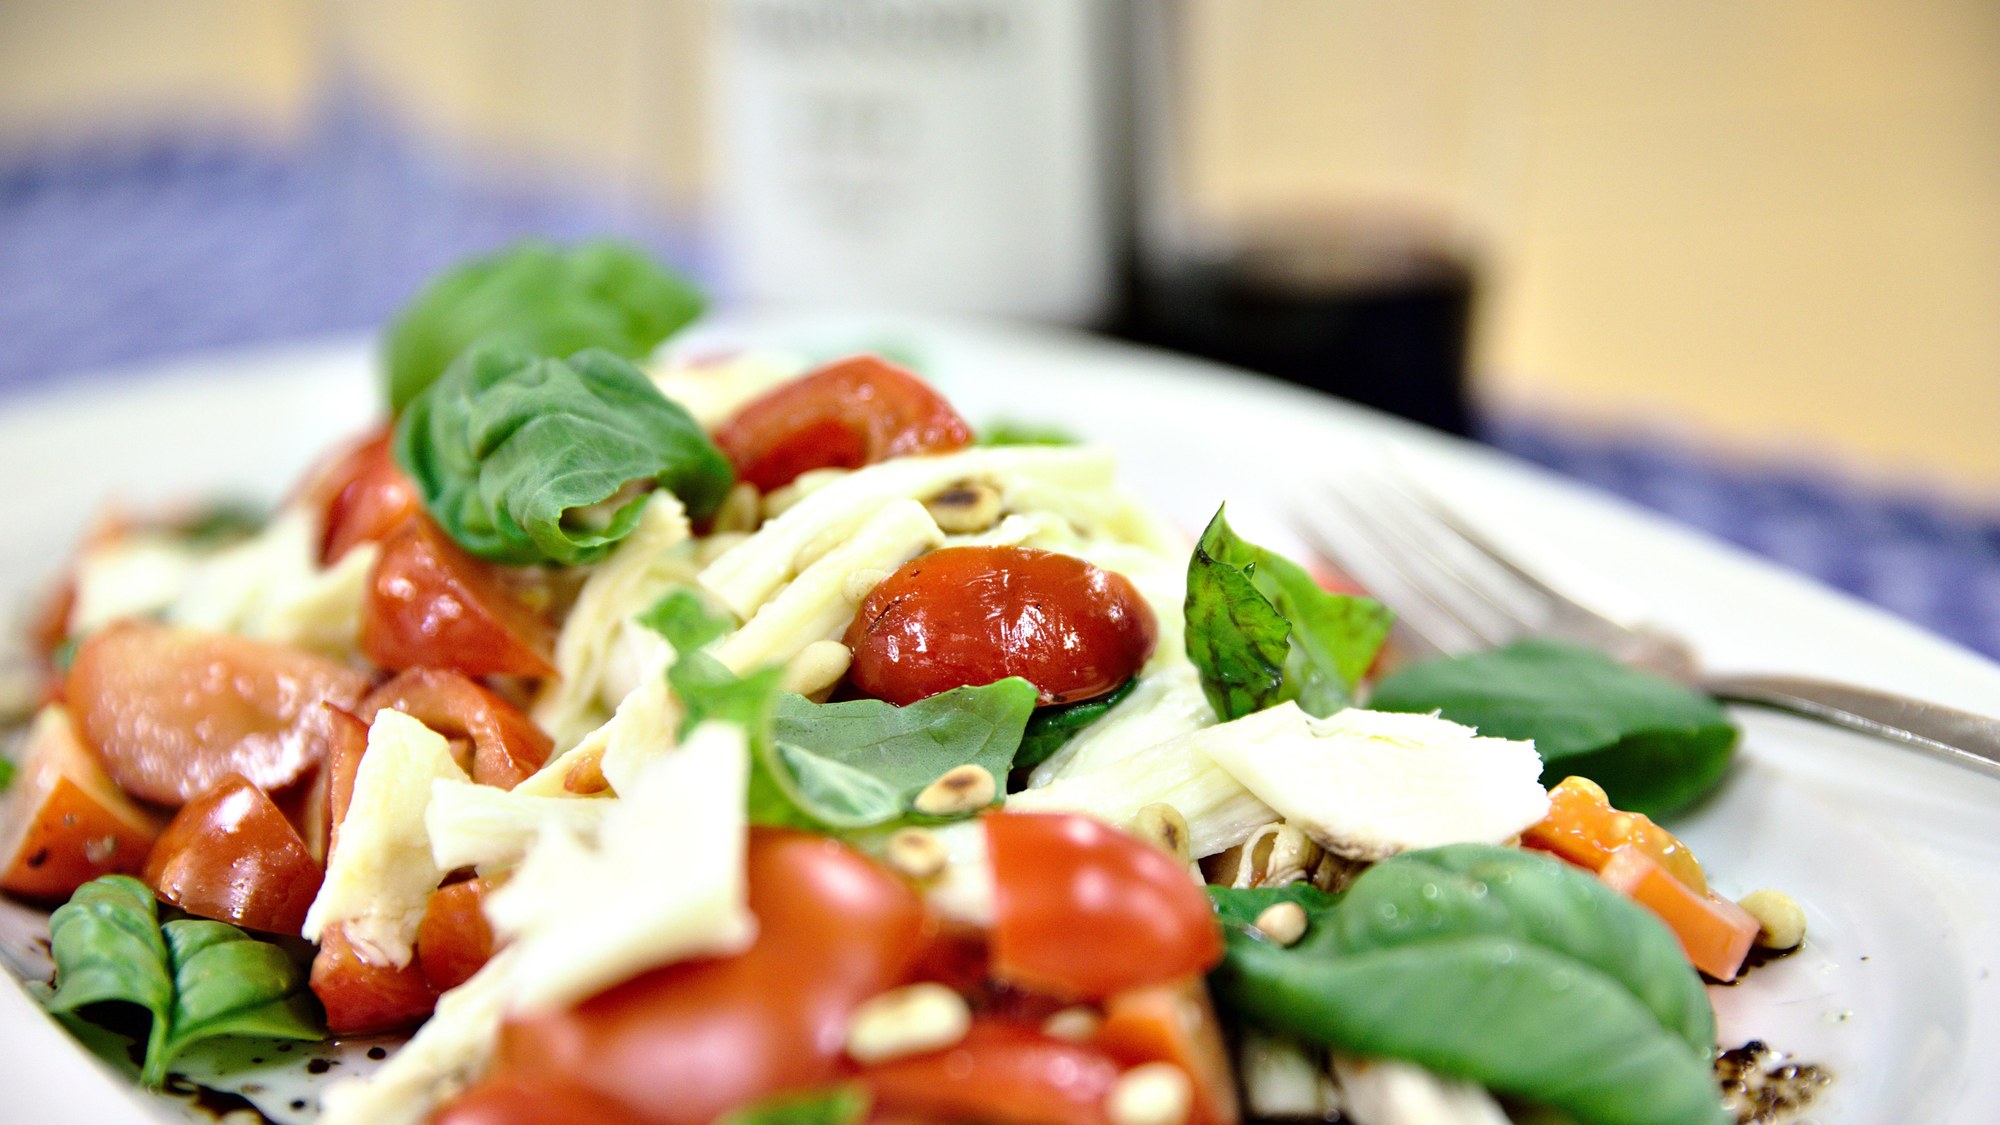 Caprese salad with tomatoes and basil from the greenhouse